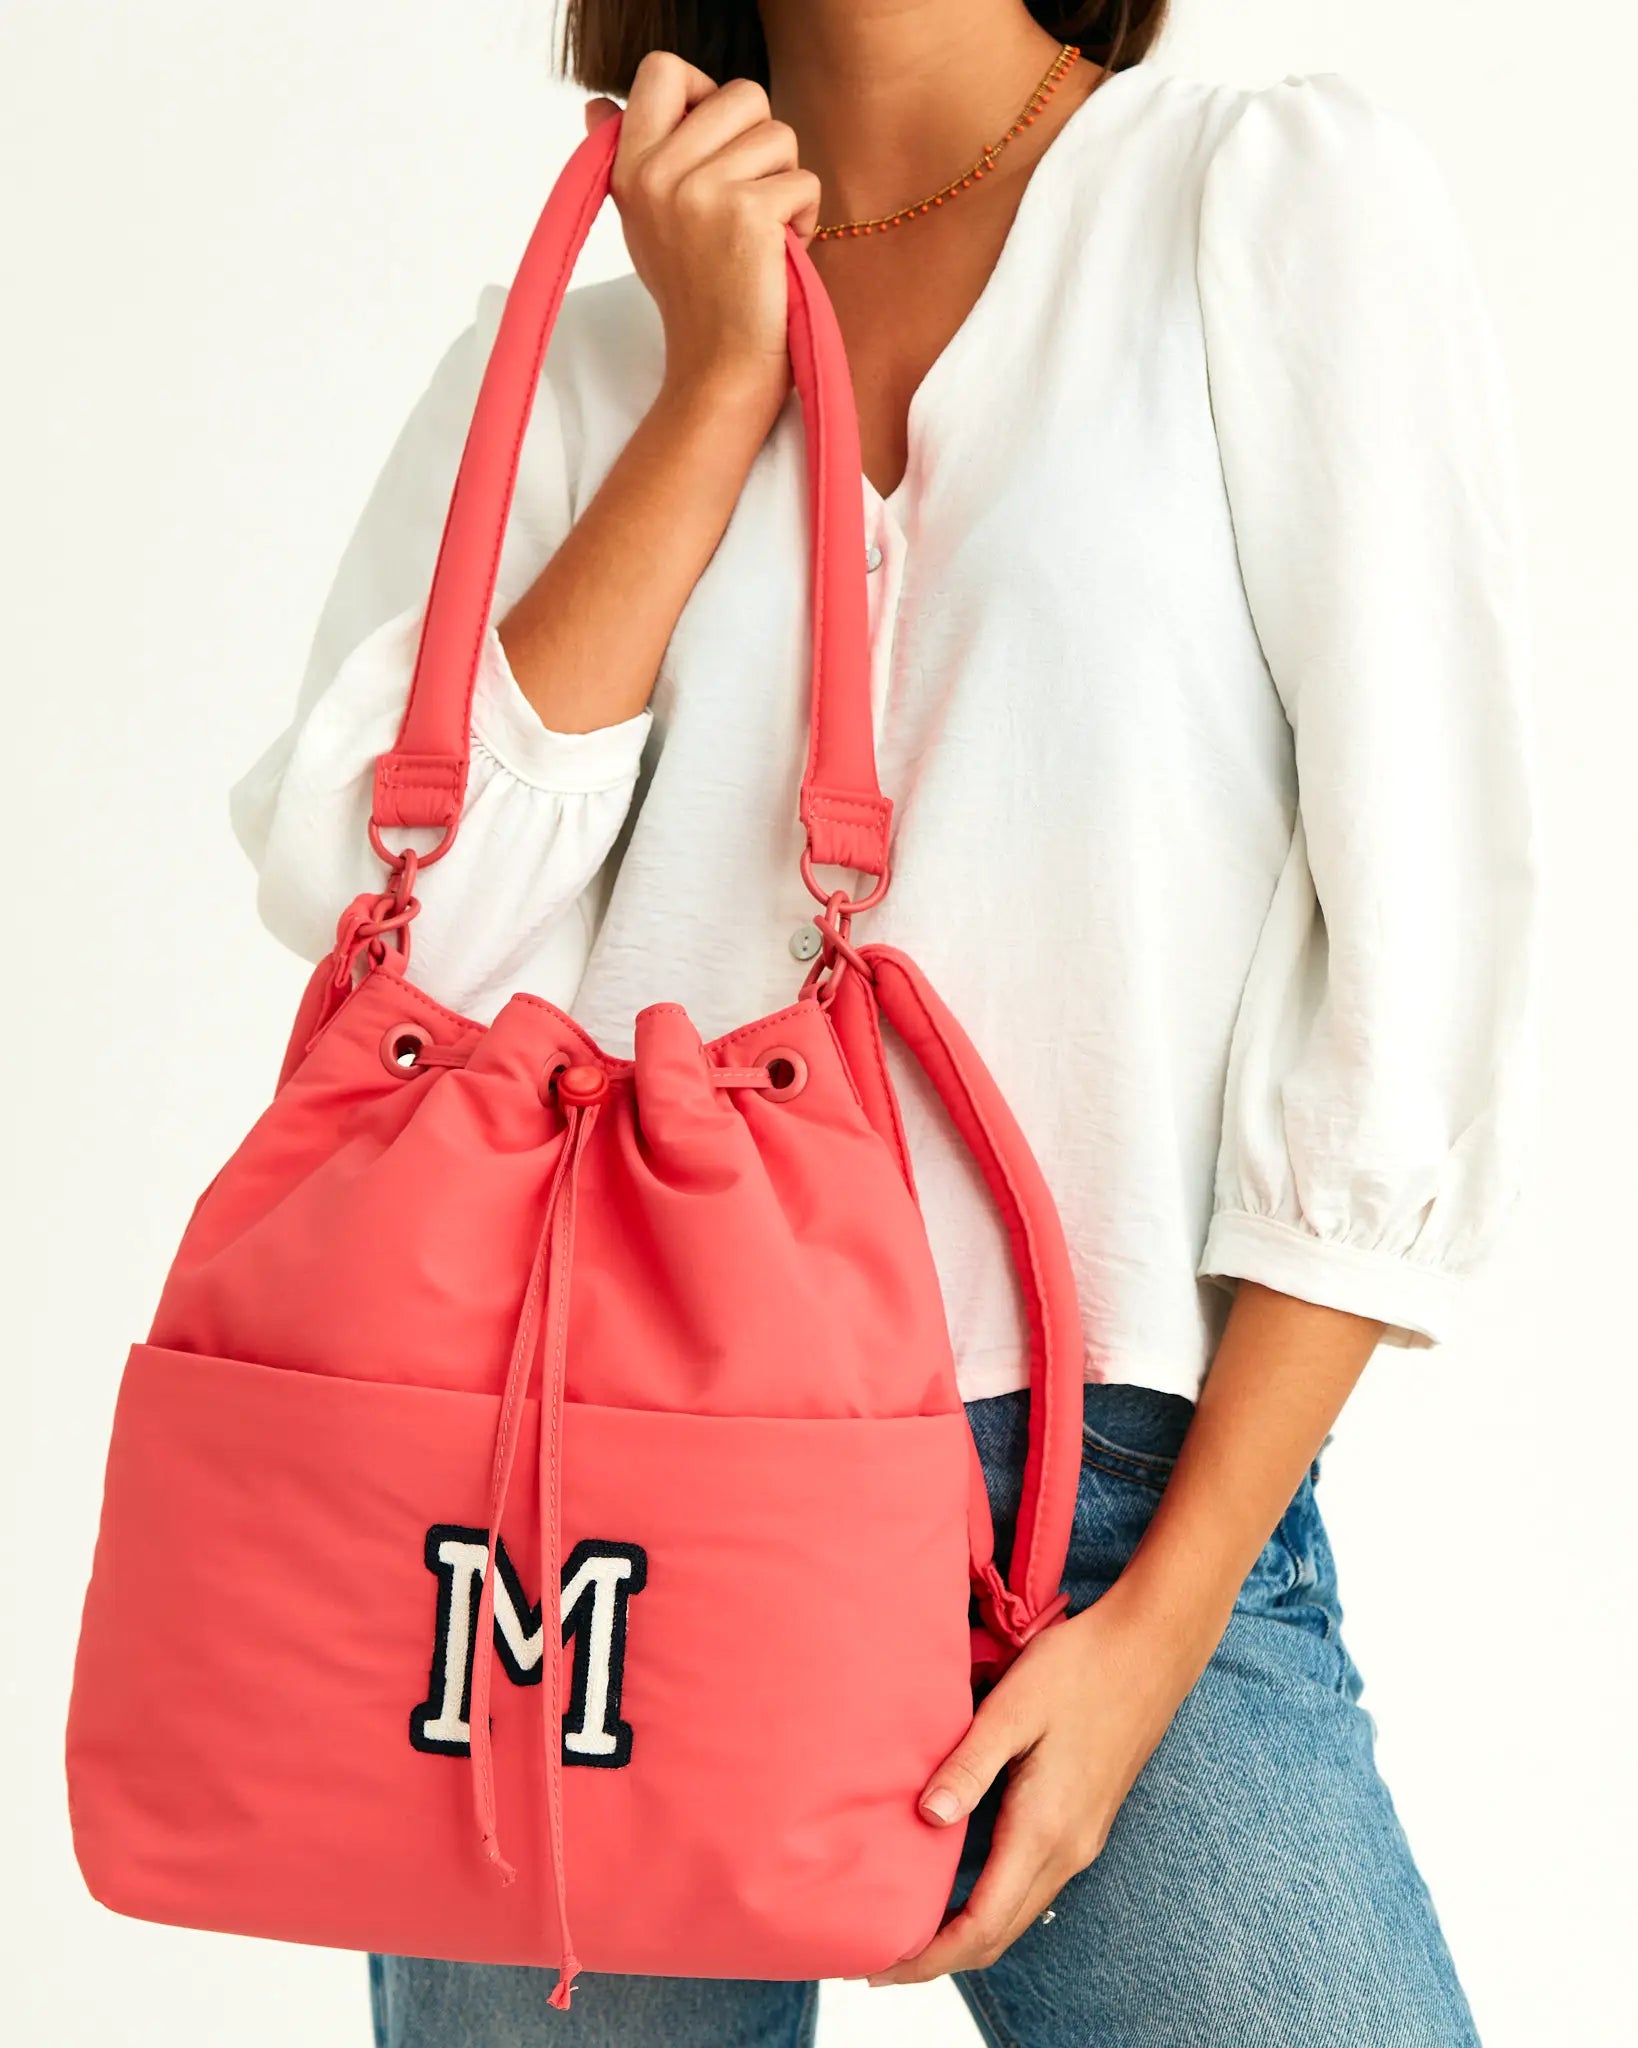 THE ANITIALS BAG | CORAL